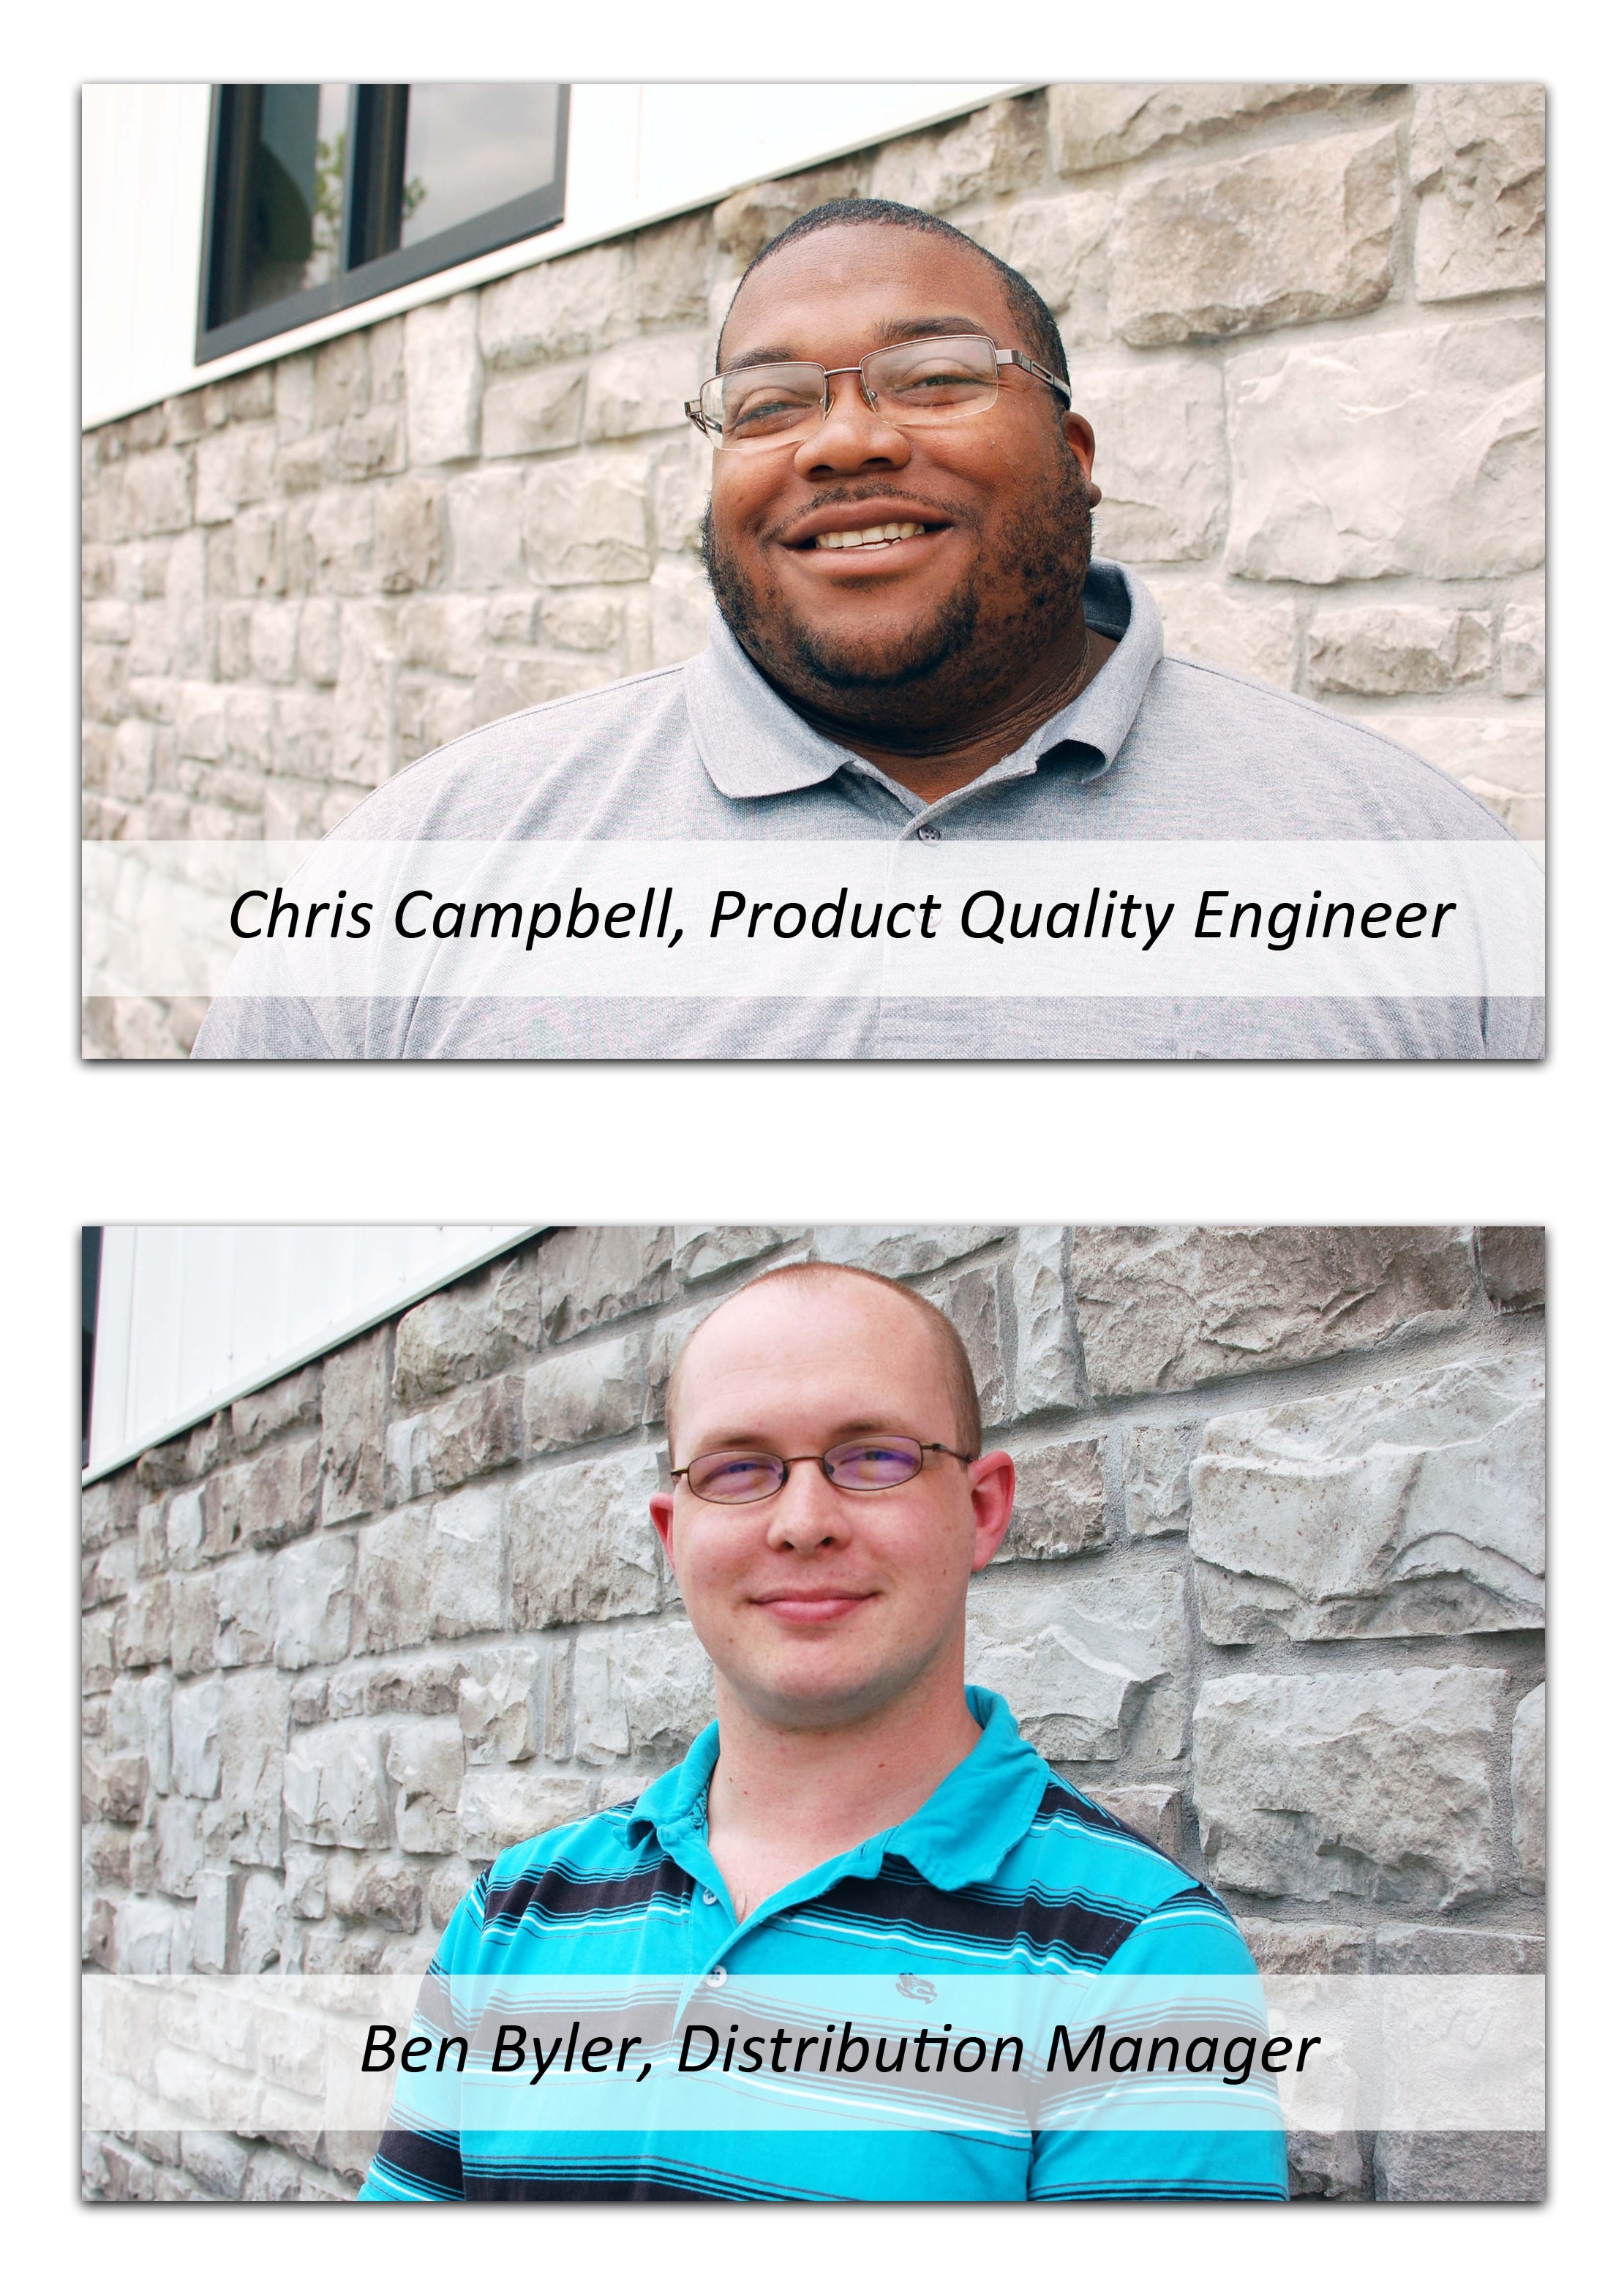 Two New Associates Join the PRIER Family